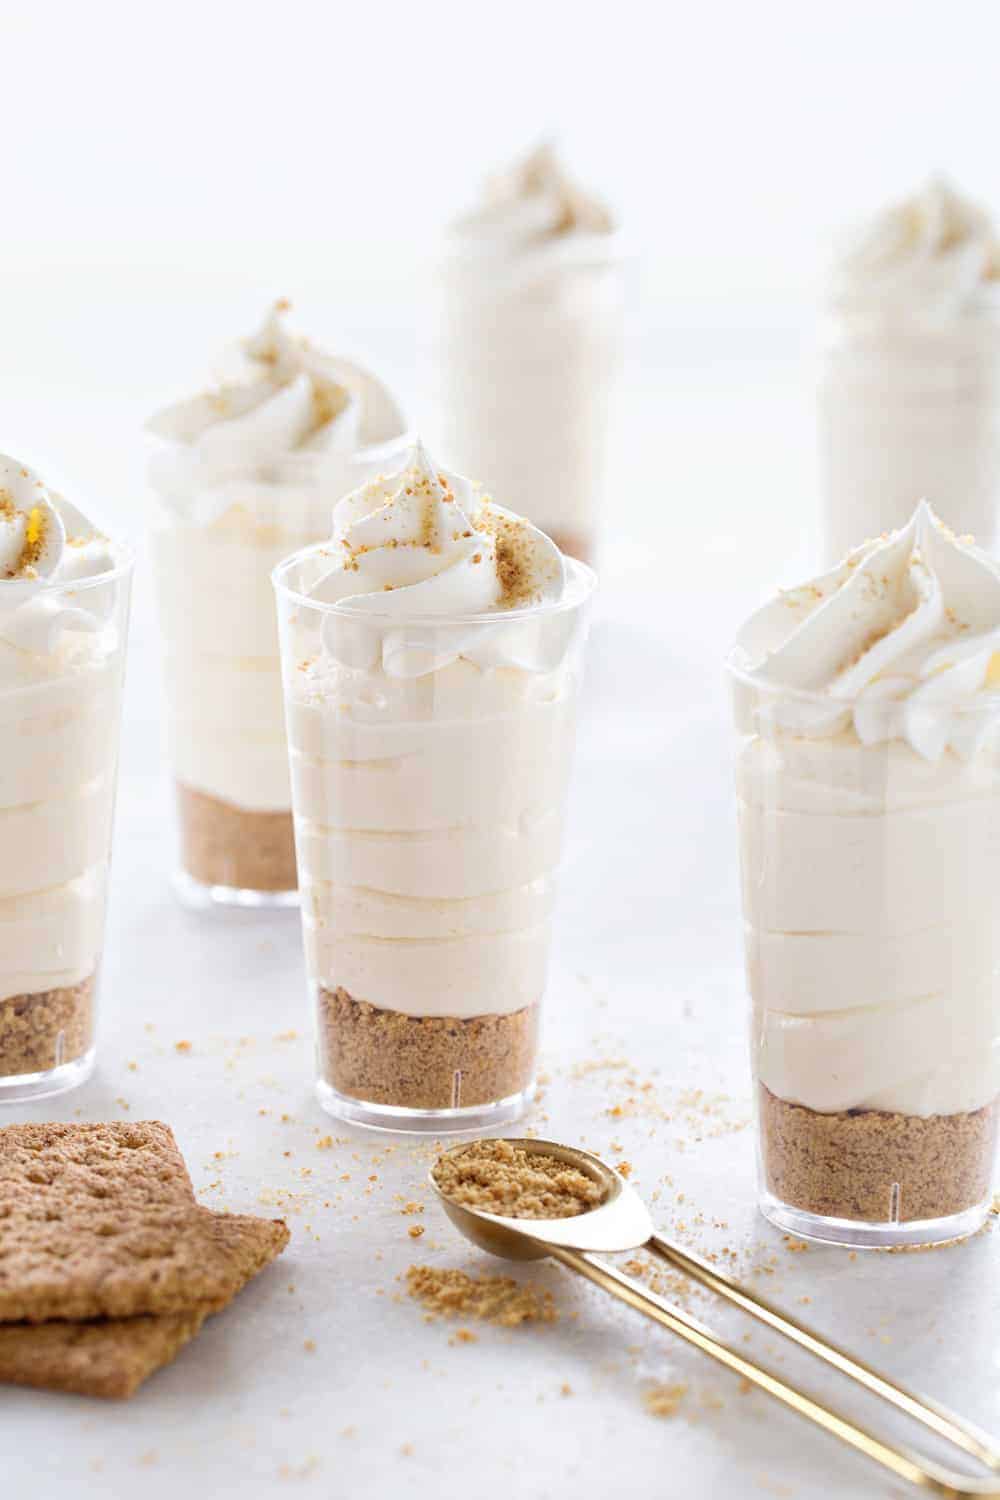 RumChata Cheesecake Pudding Shots come together with 5 simple ingredients. They're sweet, delicious and perfect for any adult party!